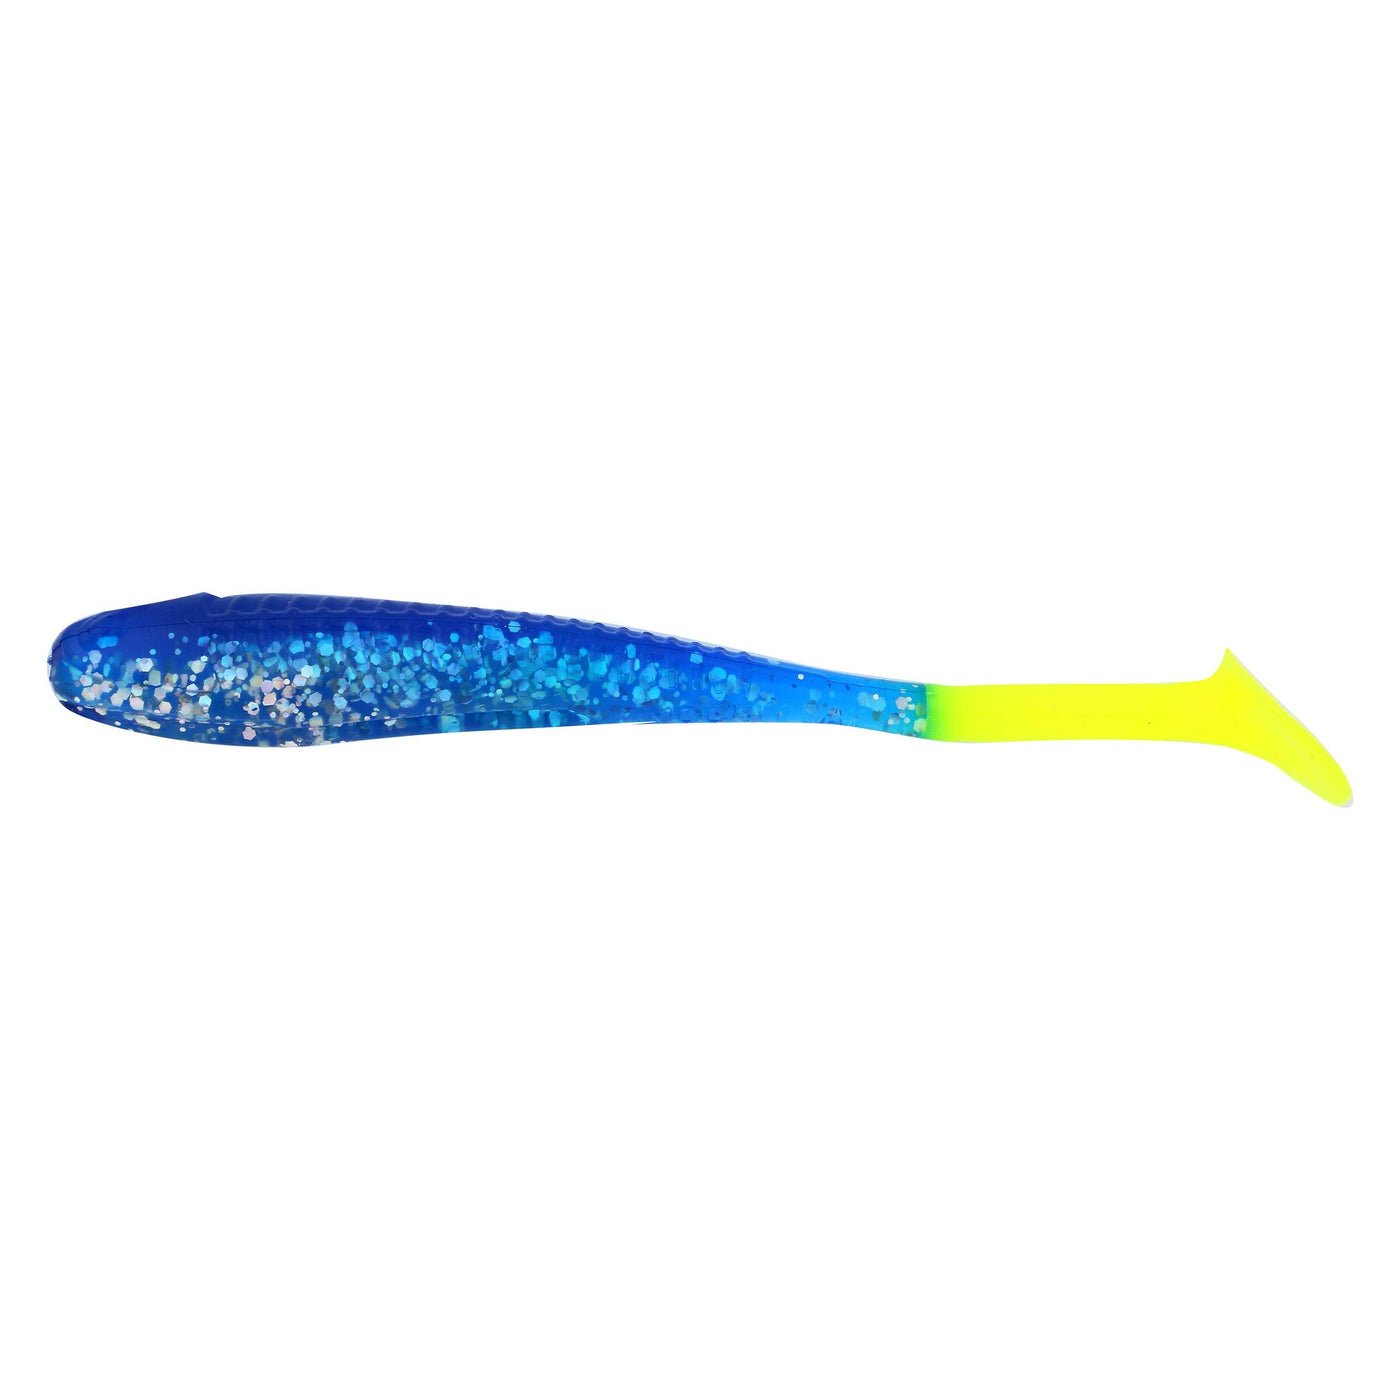 Knockin Tail Lures - Built-In Tail Rattle! - 6pk Lure Knockin Tail Lures Blue Ice Limetreuse 